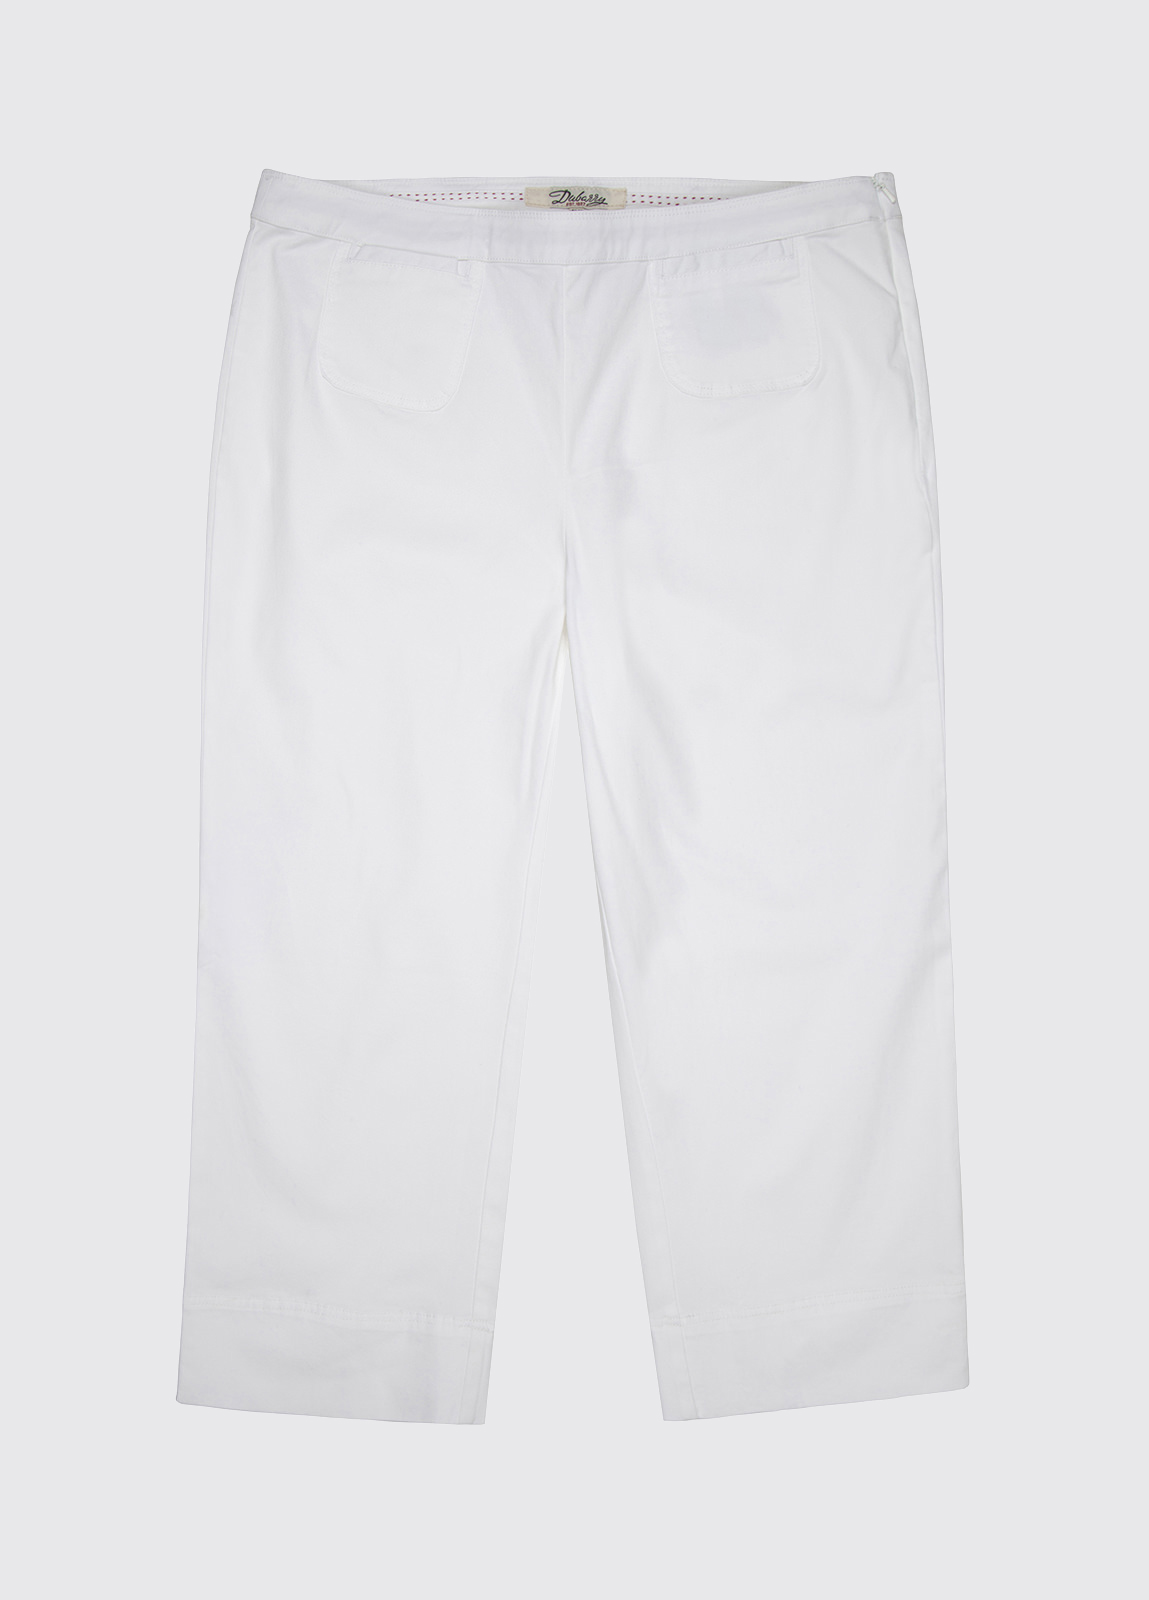 Bluebell Cropped Trousers - White